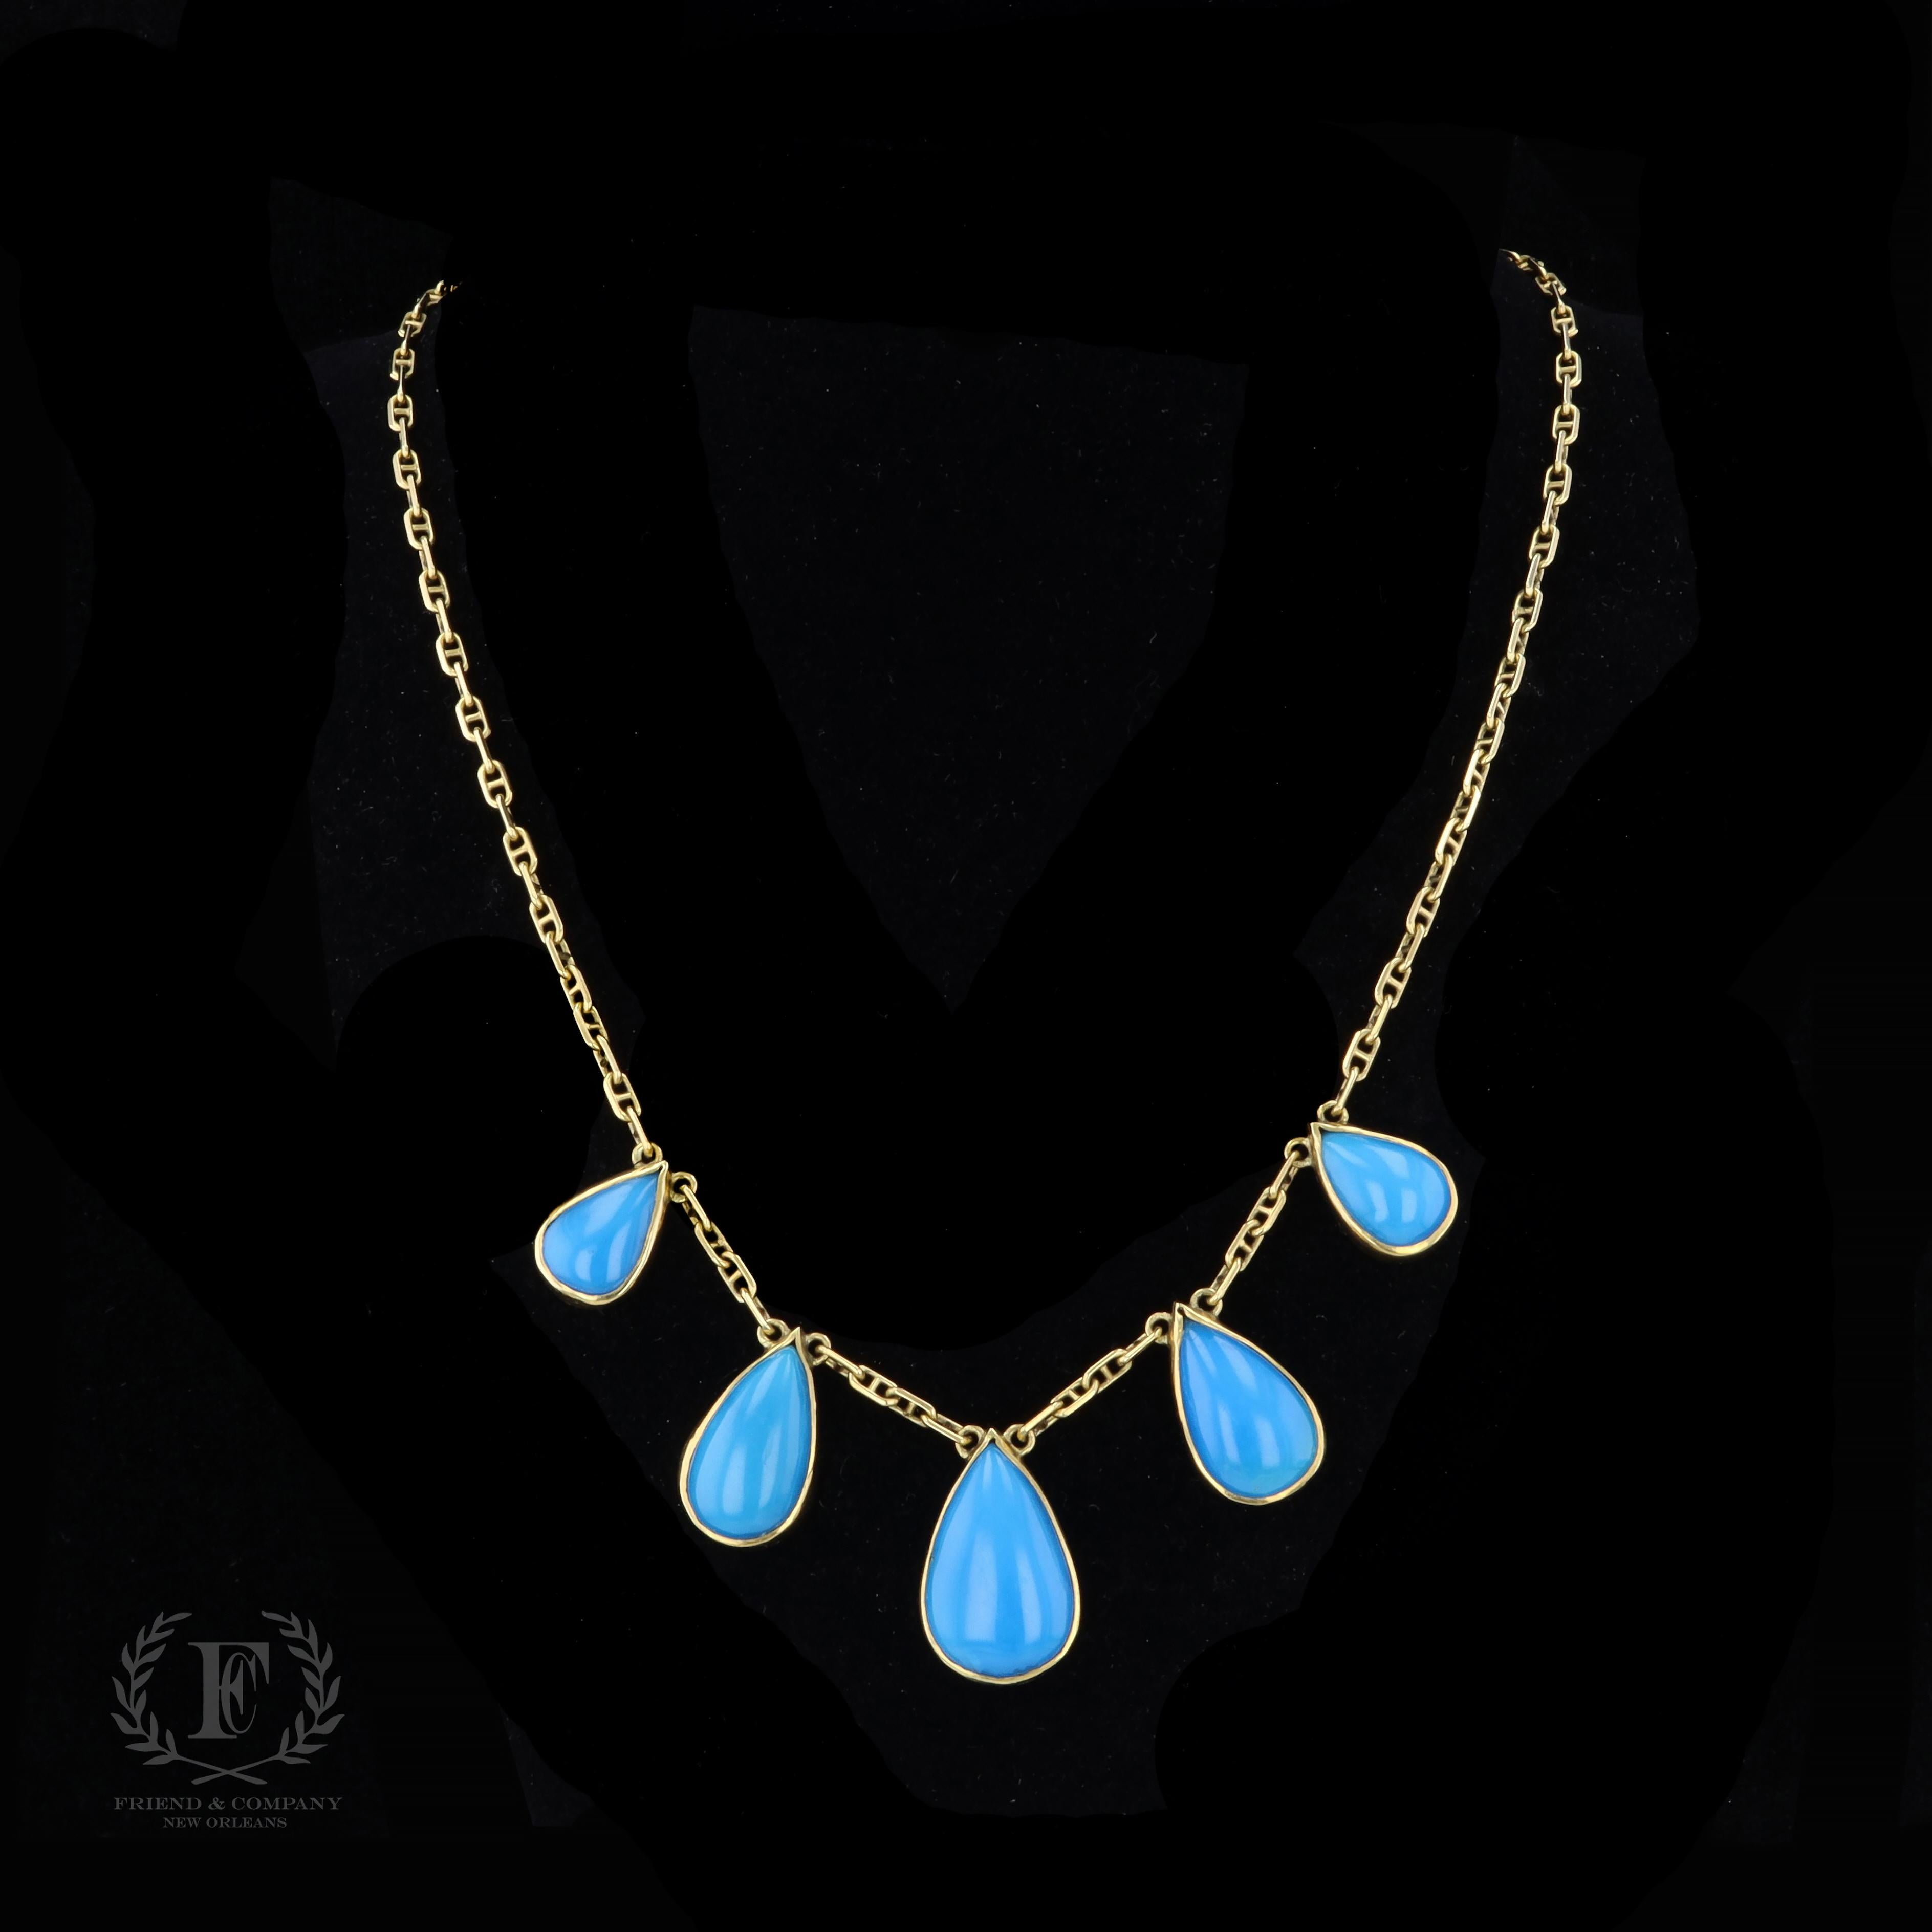 An extraordinary statement necklace that is perfect for all of your spring and summer soirées. The necklace is set with five pear cabochon cut turquoise stones. The necklace measures 20 inches in length and weighs 28.3 grams.